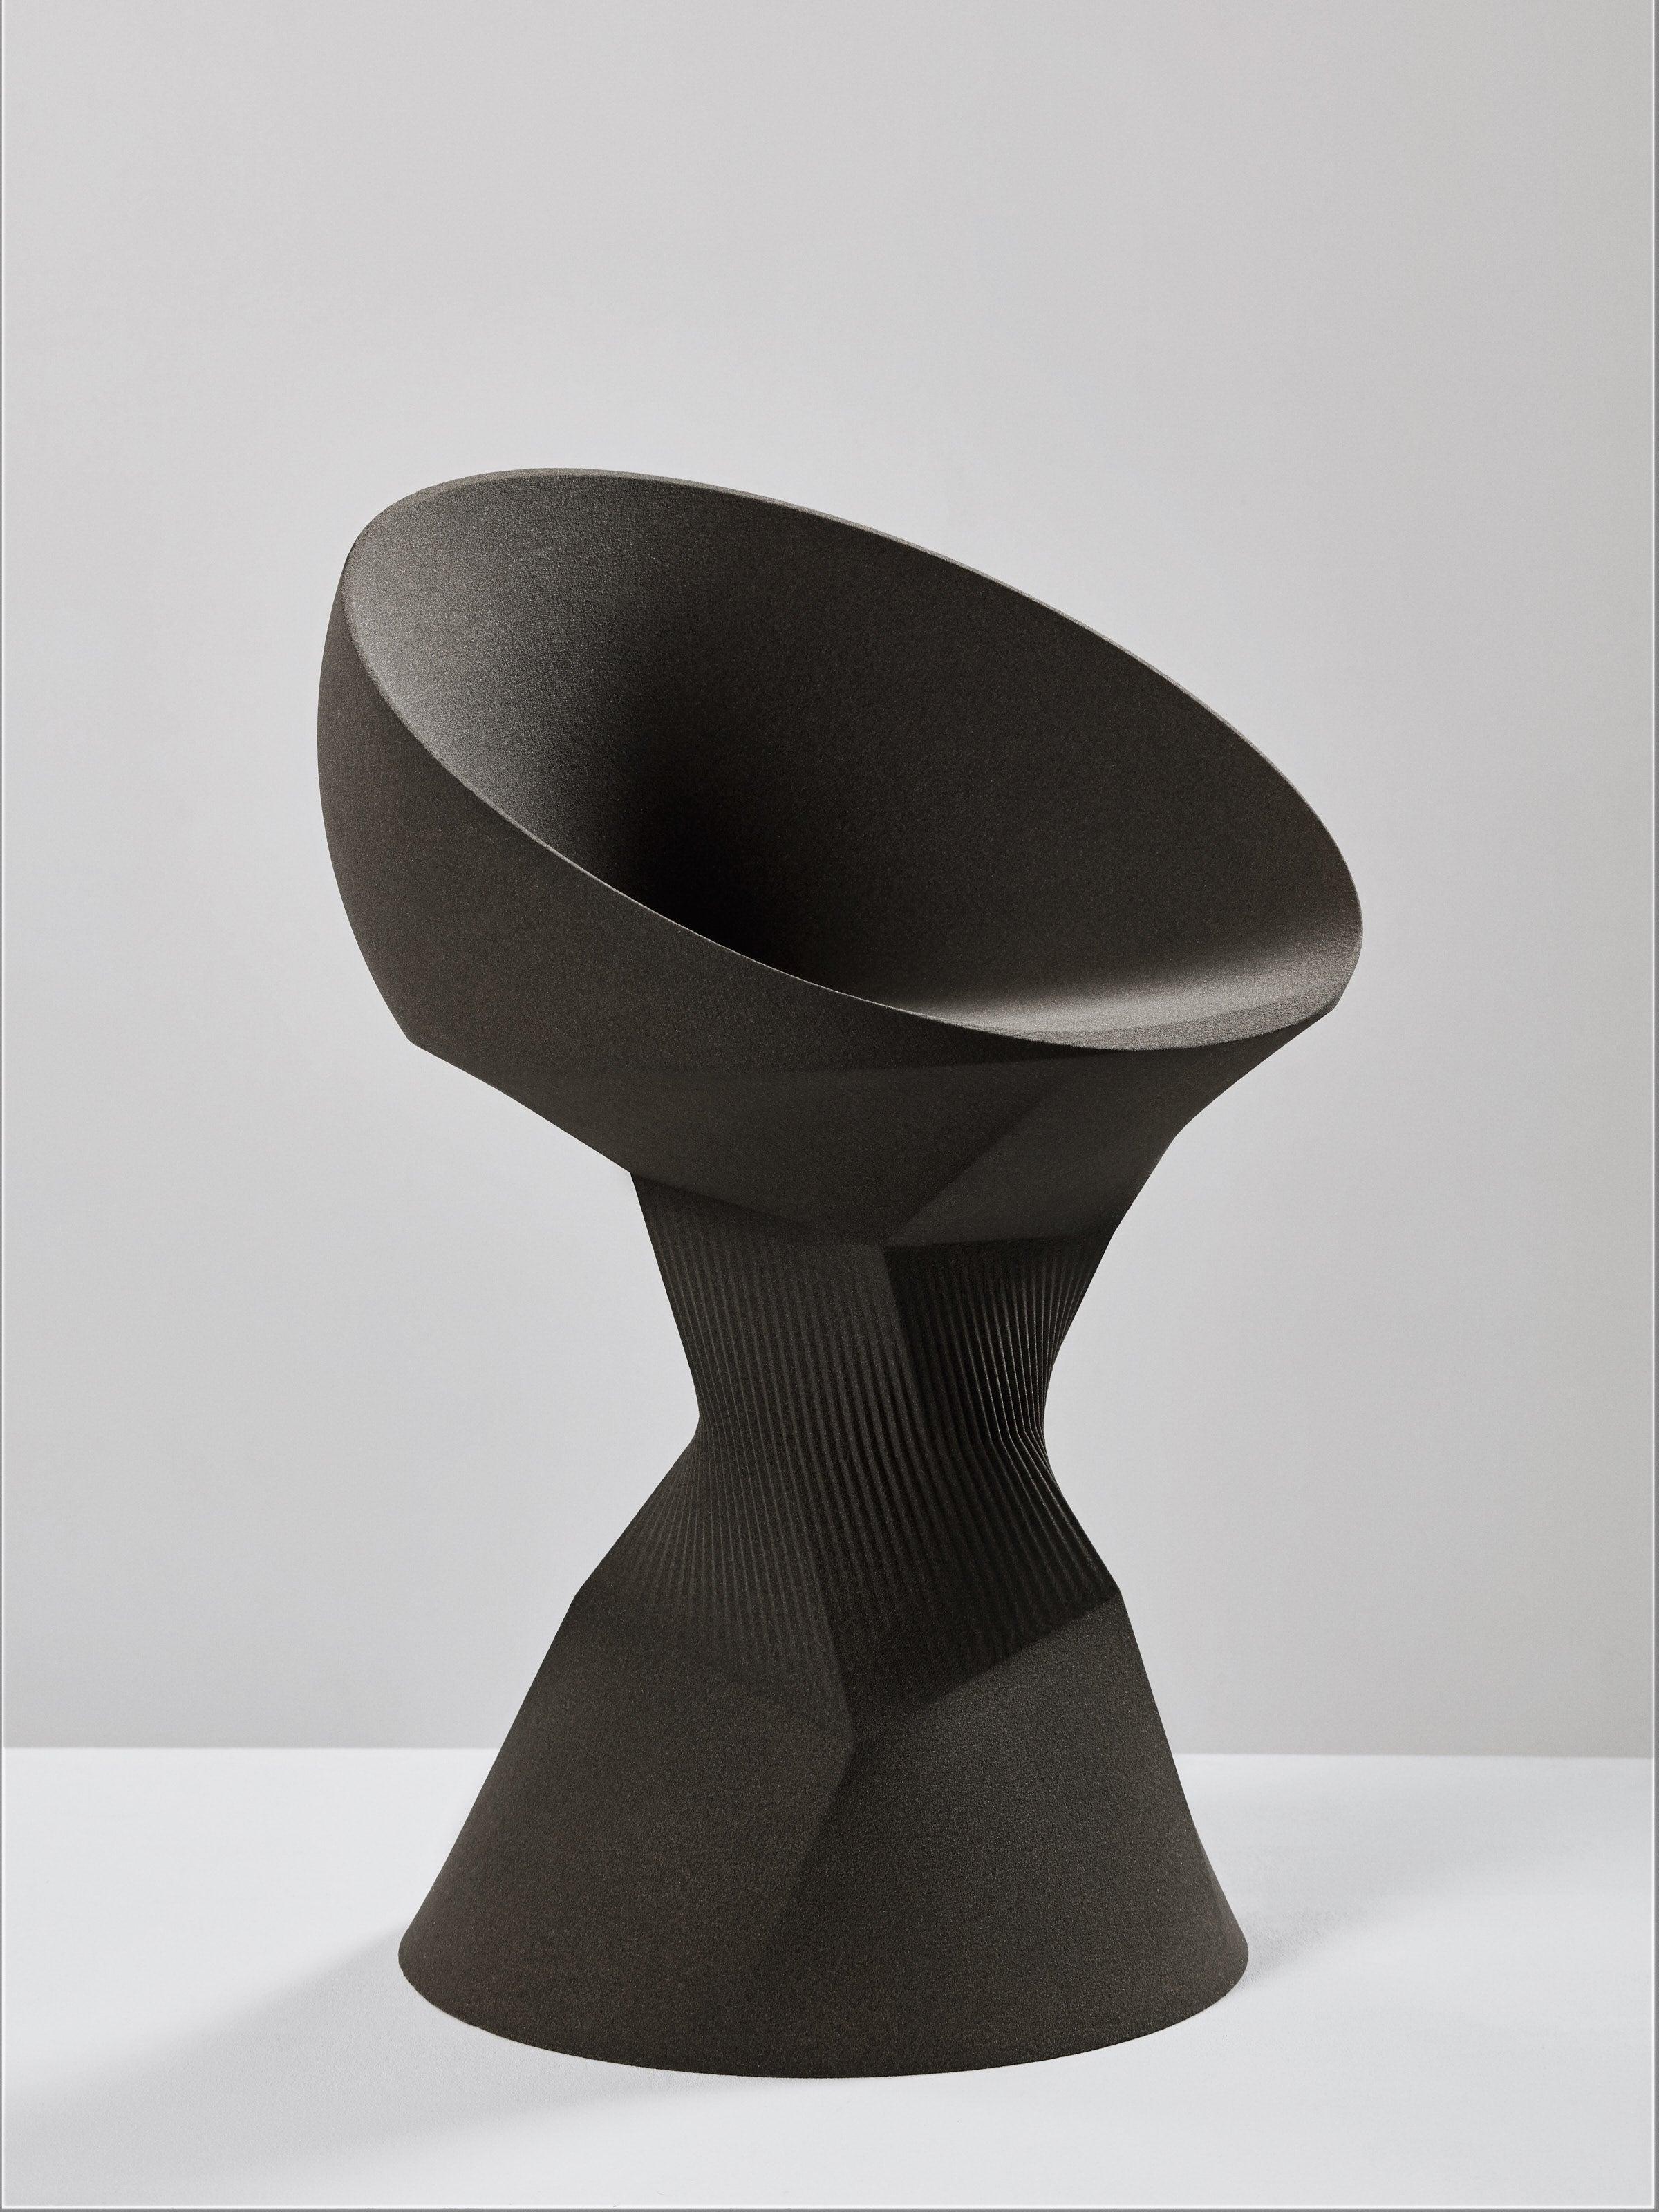 Pleat Chair by Rive Roshan